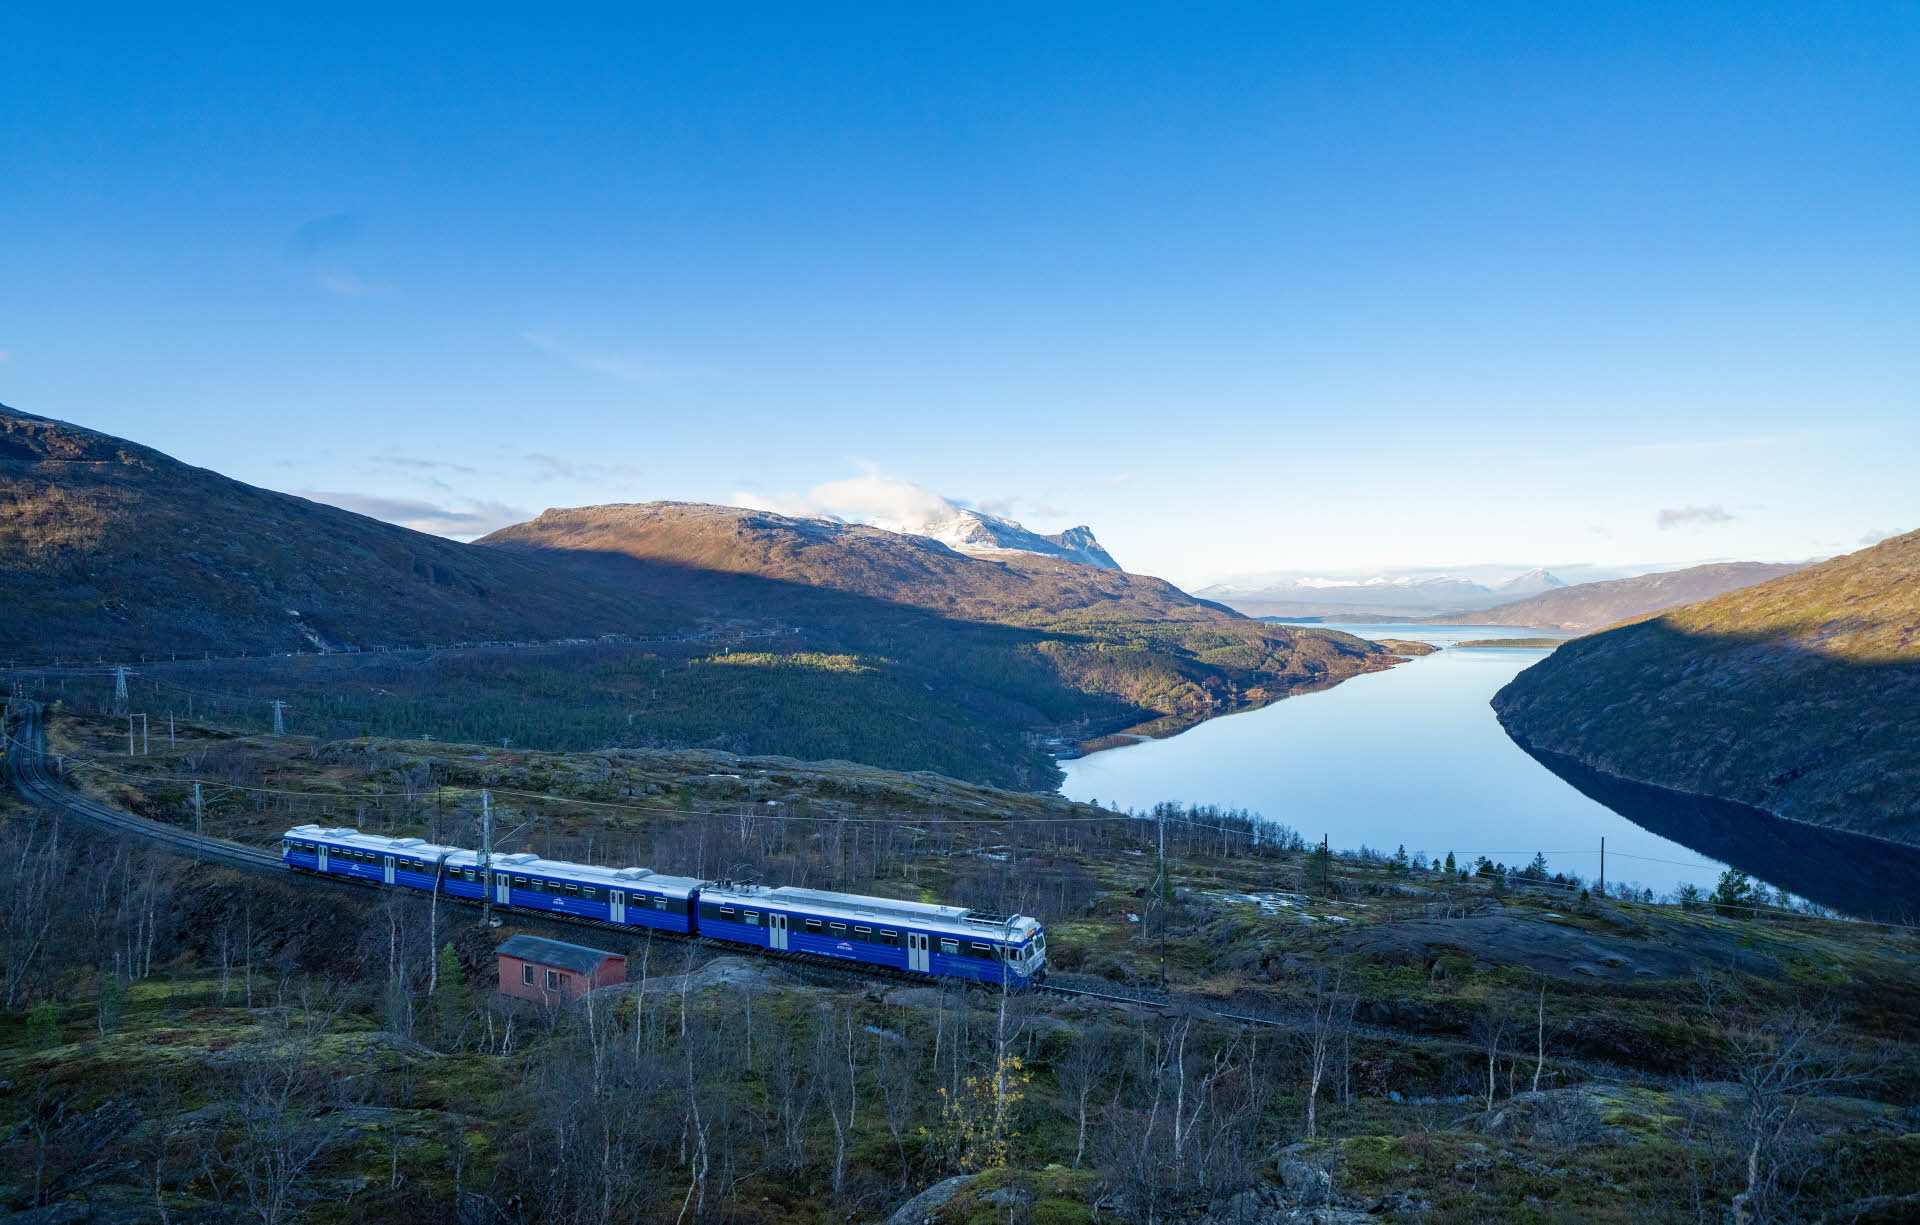 The blue Arctic Train in the landscape above Rombaksfjord